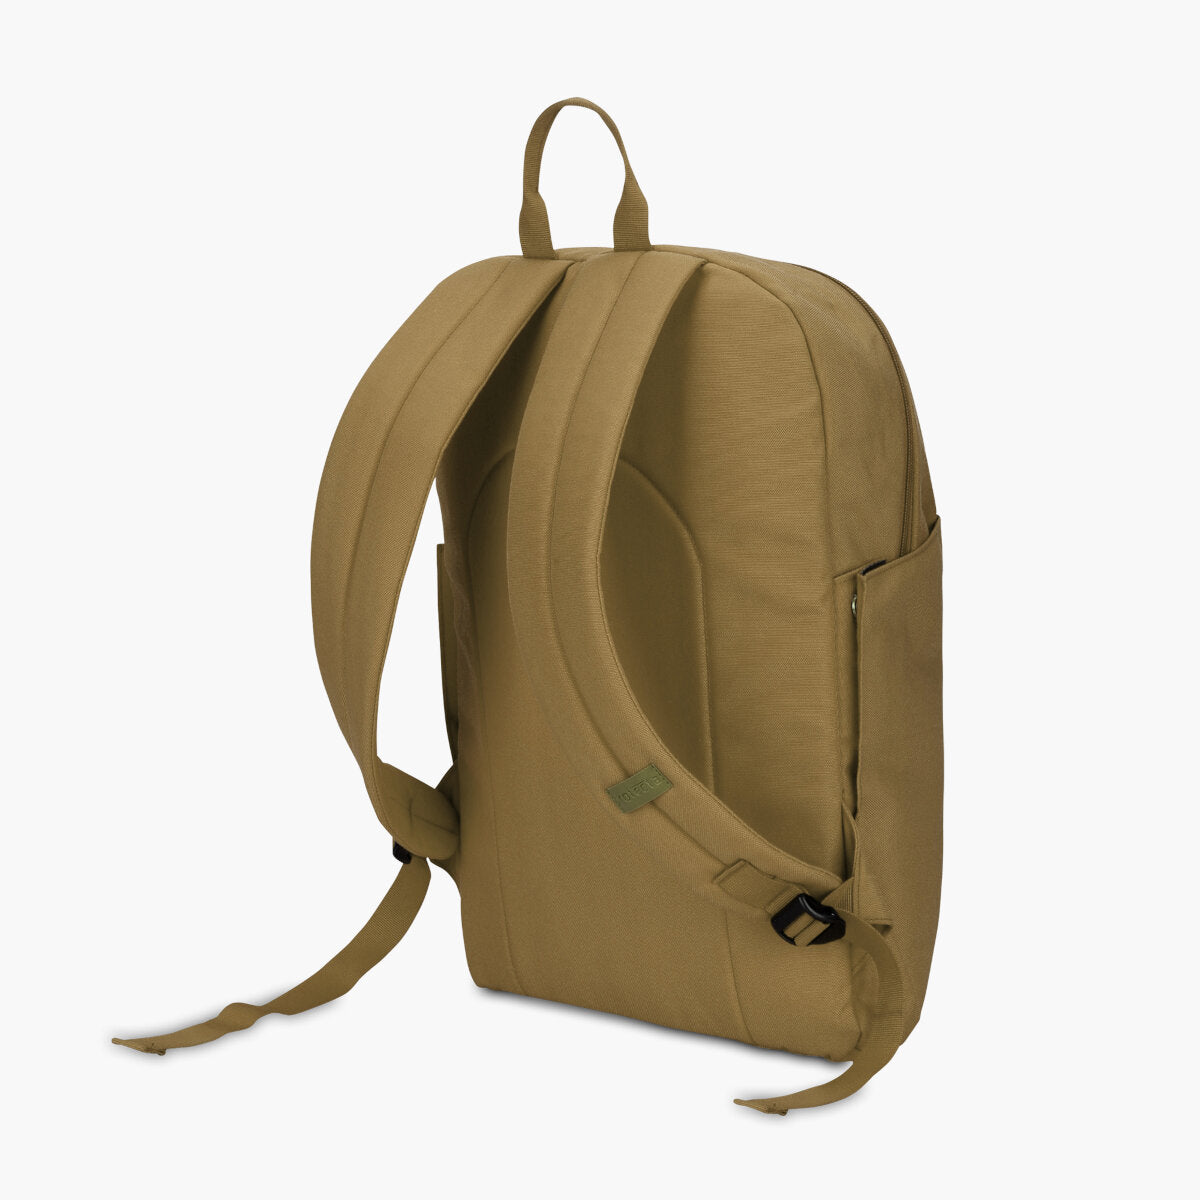 Beige | Protecta Strong Buzz Laptop Backpack - 7